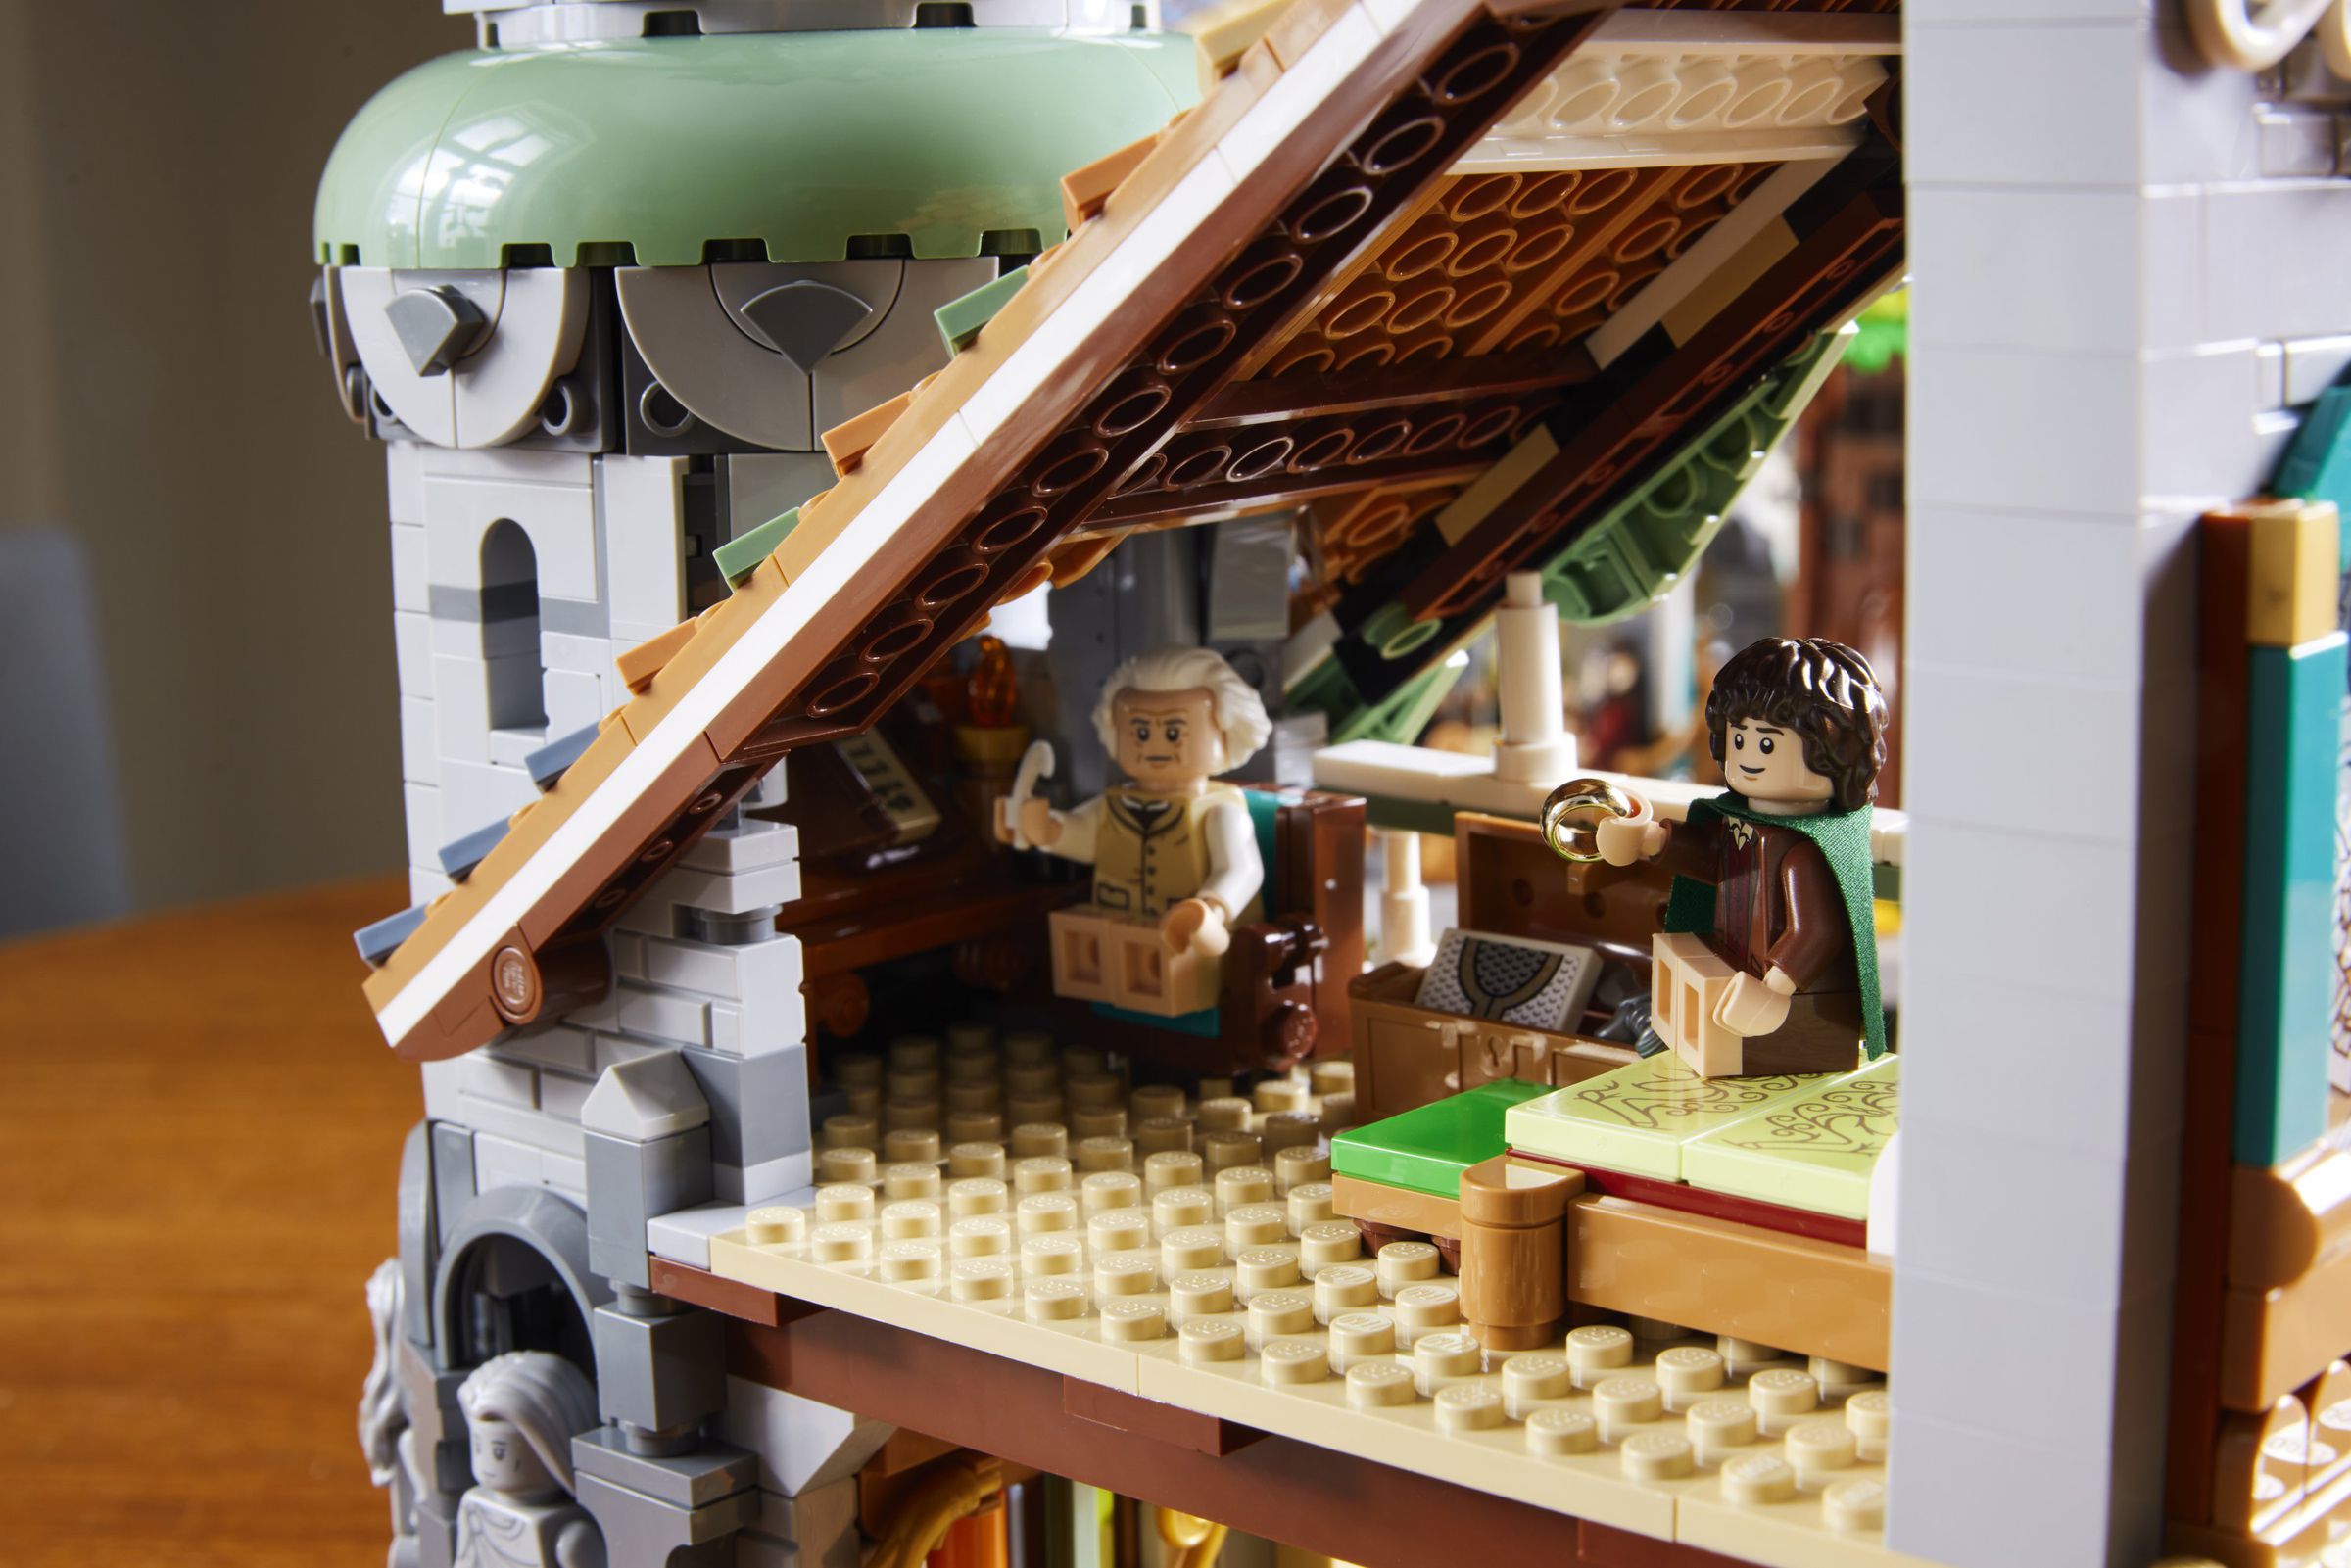 Image of Lego Bilbo and Frodo sitting in a room.